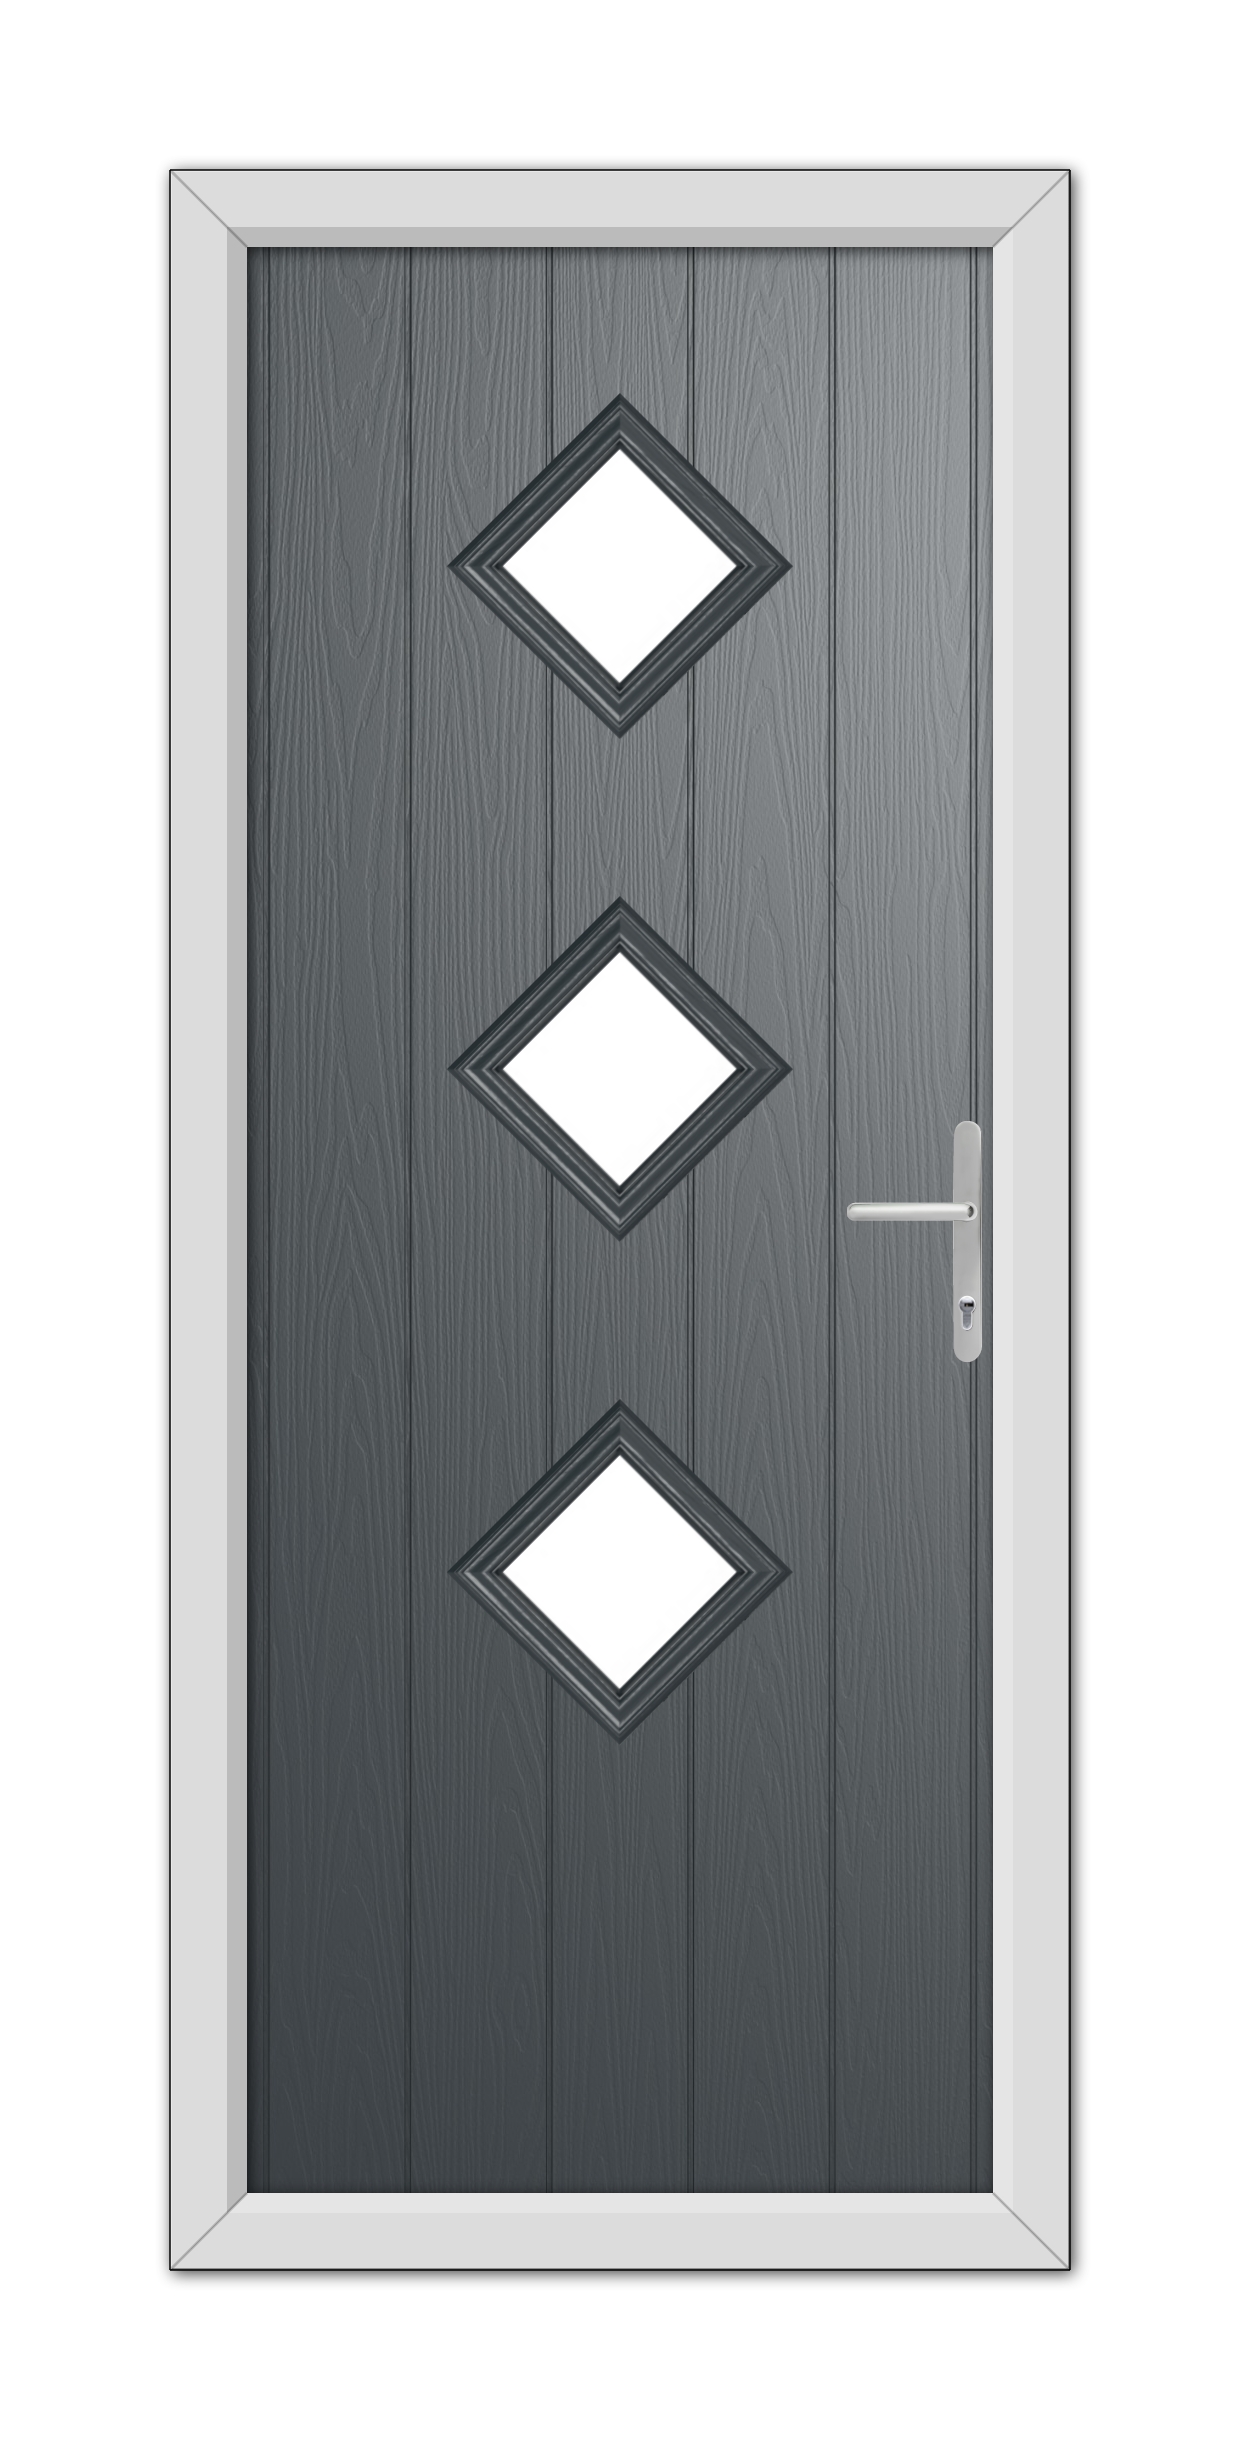 A modern Anthracite Grey Richmond Composite Door 48mm Timber Core featuring three diamond-shaped windows and a simple lever handle, all set within a white frame.